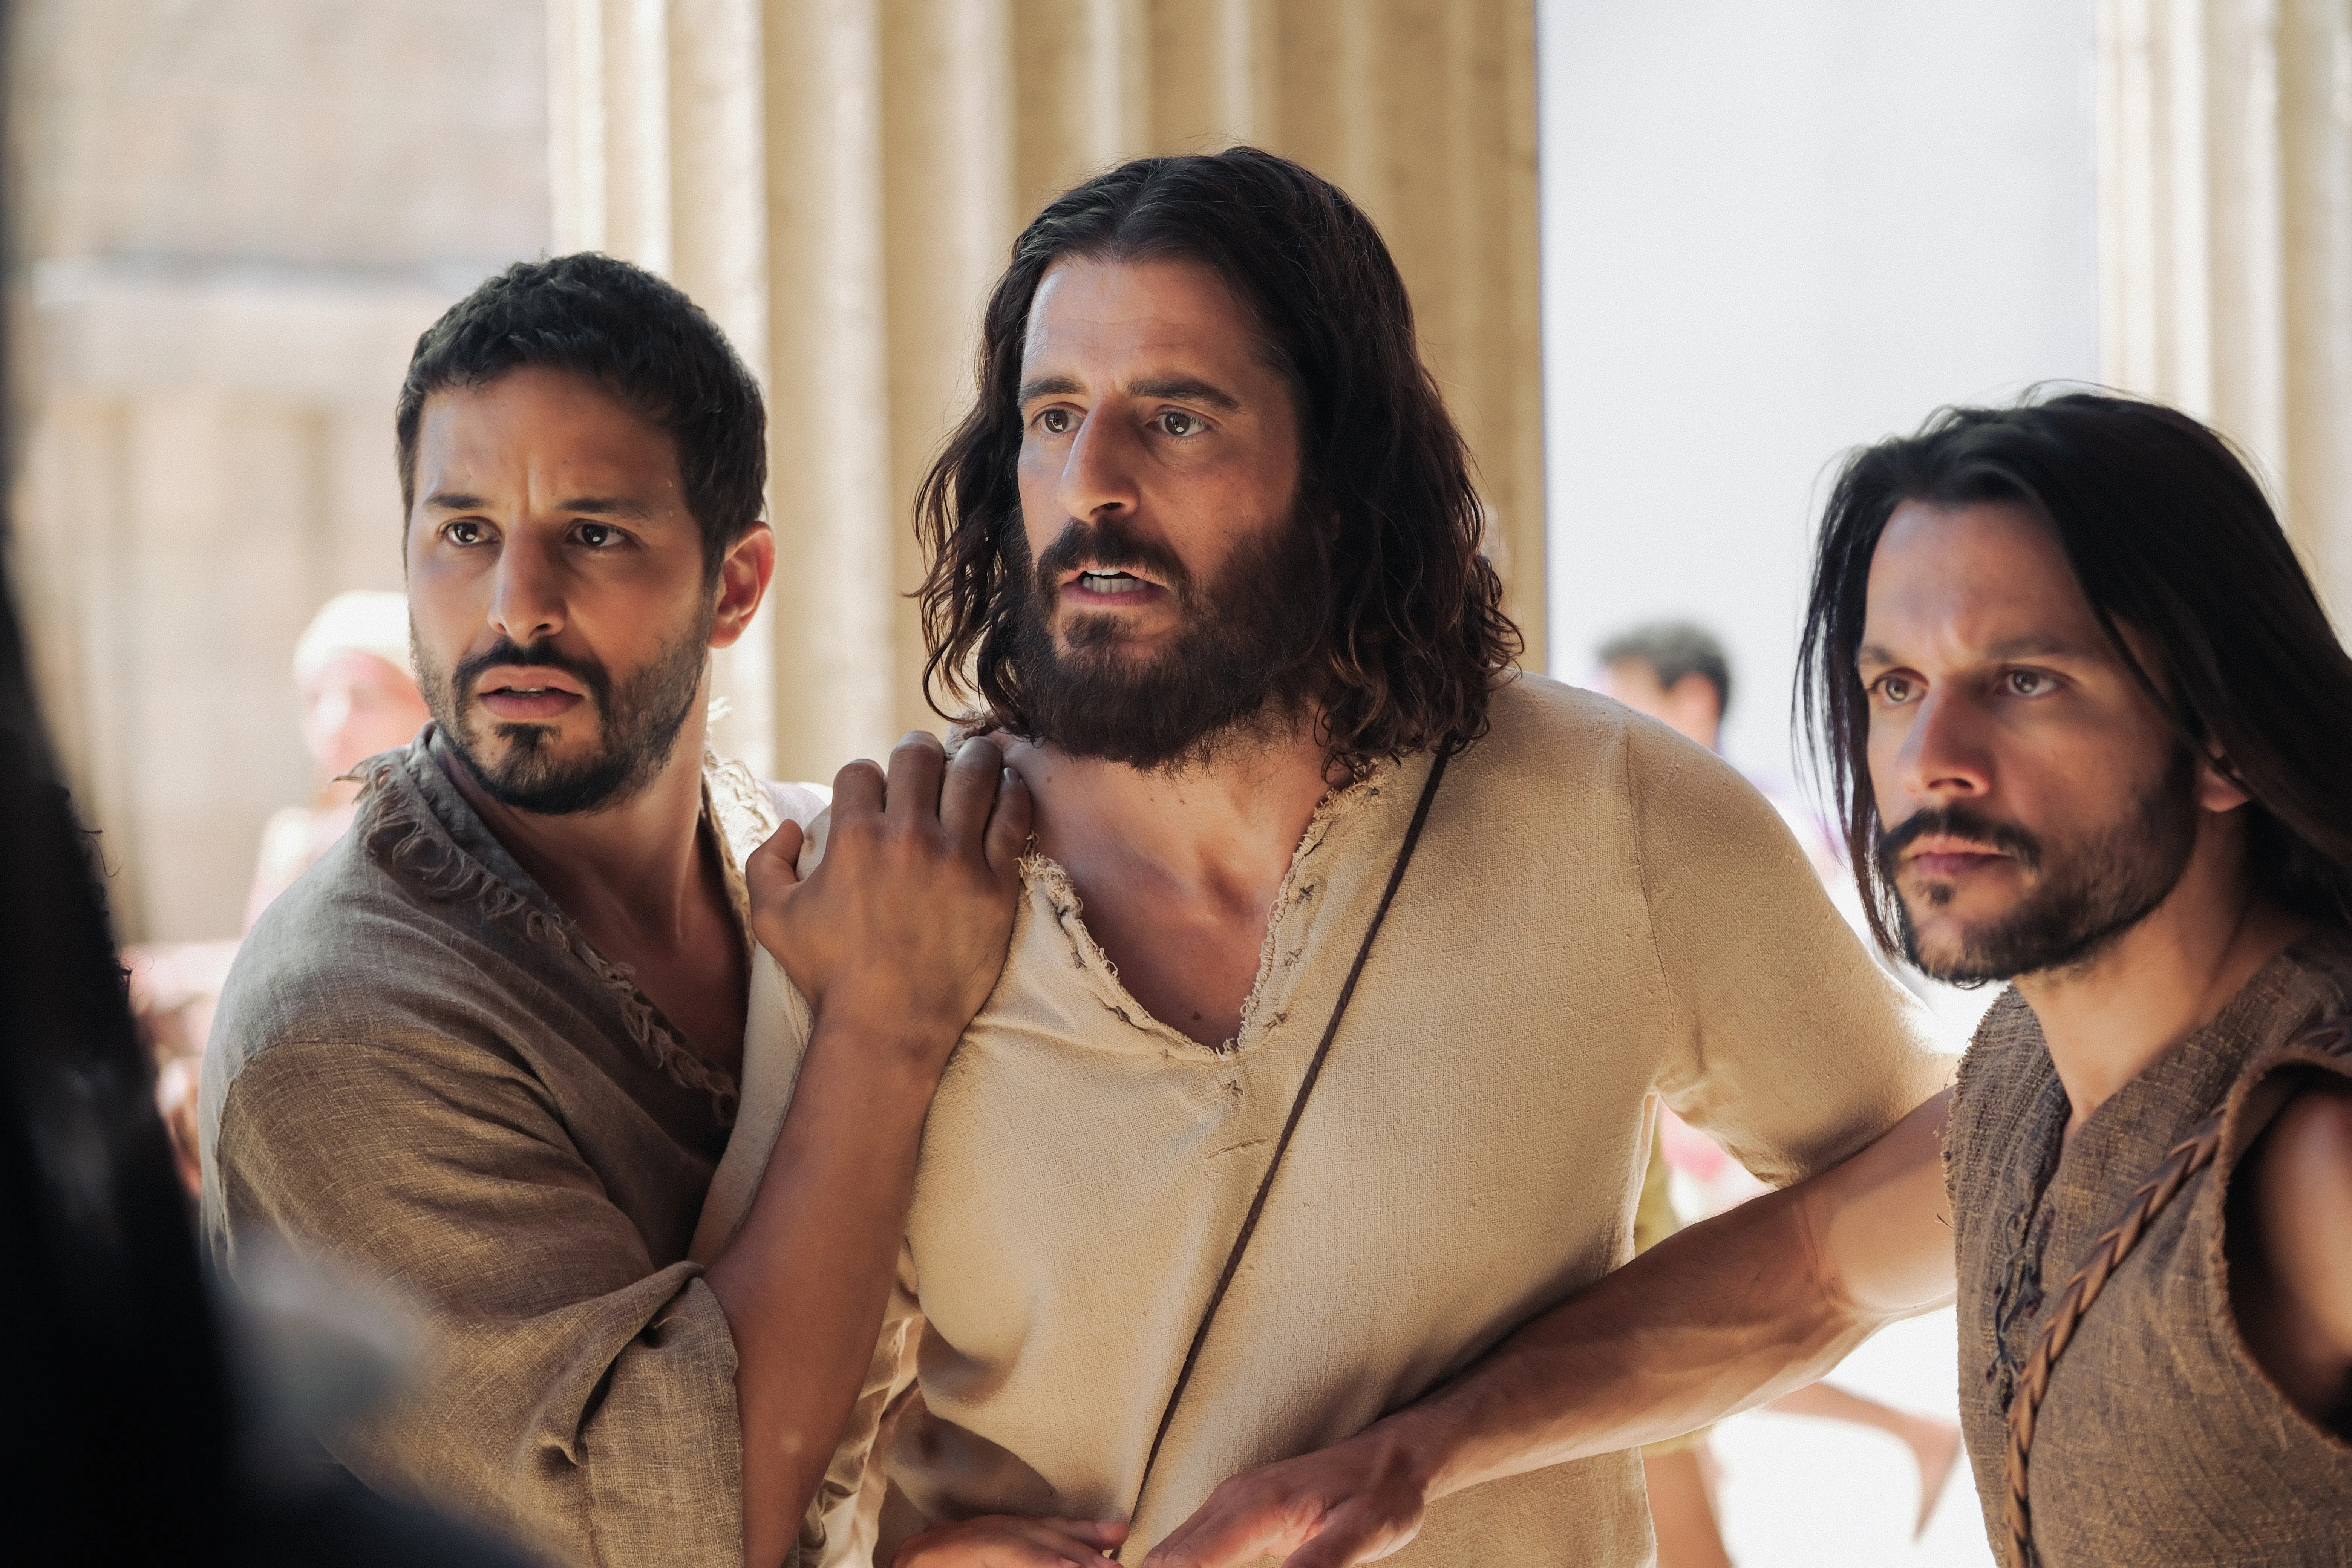 Left to right: Simon Zee (Alaa Safi), Jesus (Jonathan Roumie), and Simon Peter (Shahar Isaac) in Season Four of "The Chosen," releasing exclusively in theaters starting Feb. 1, 2024.?w=200&h=150